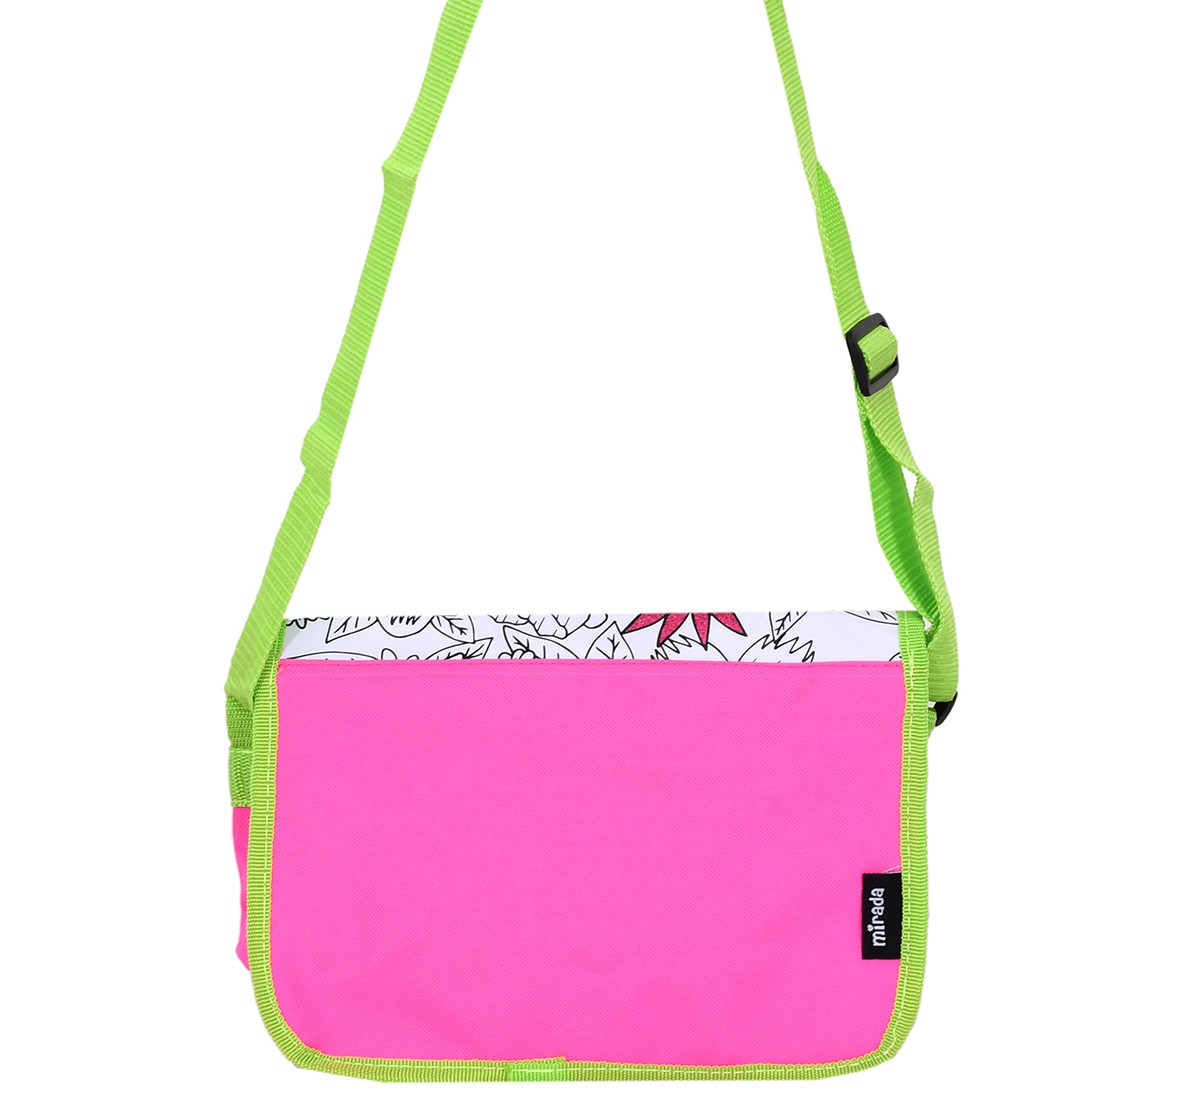 Mirada Color Your Own Girlie Sling Purse, 3Y+, Multicolour